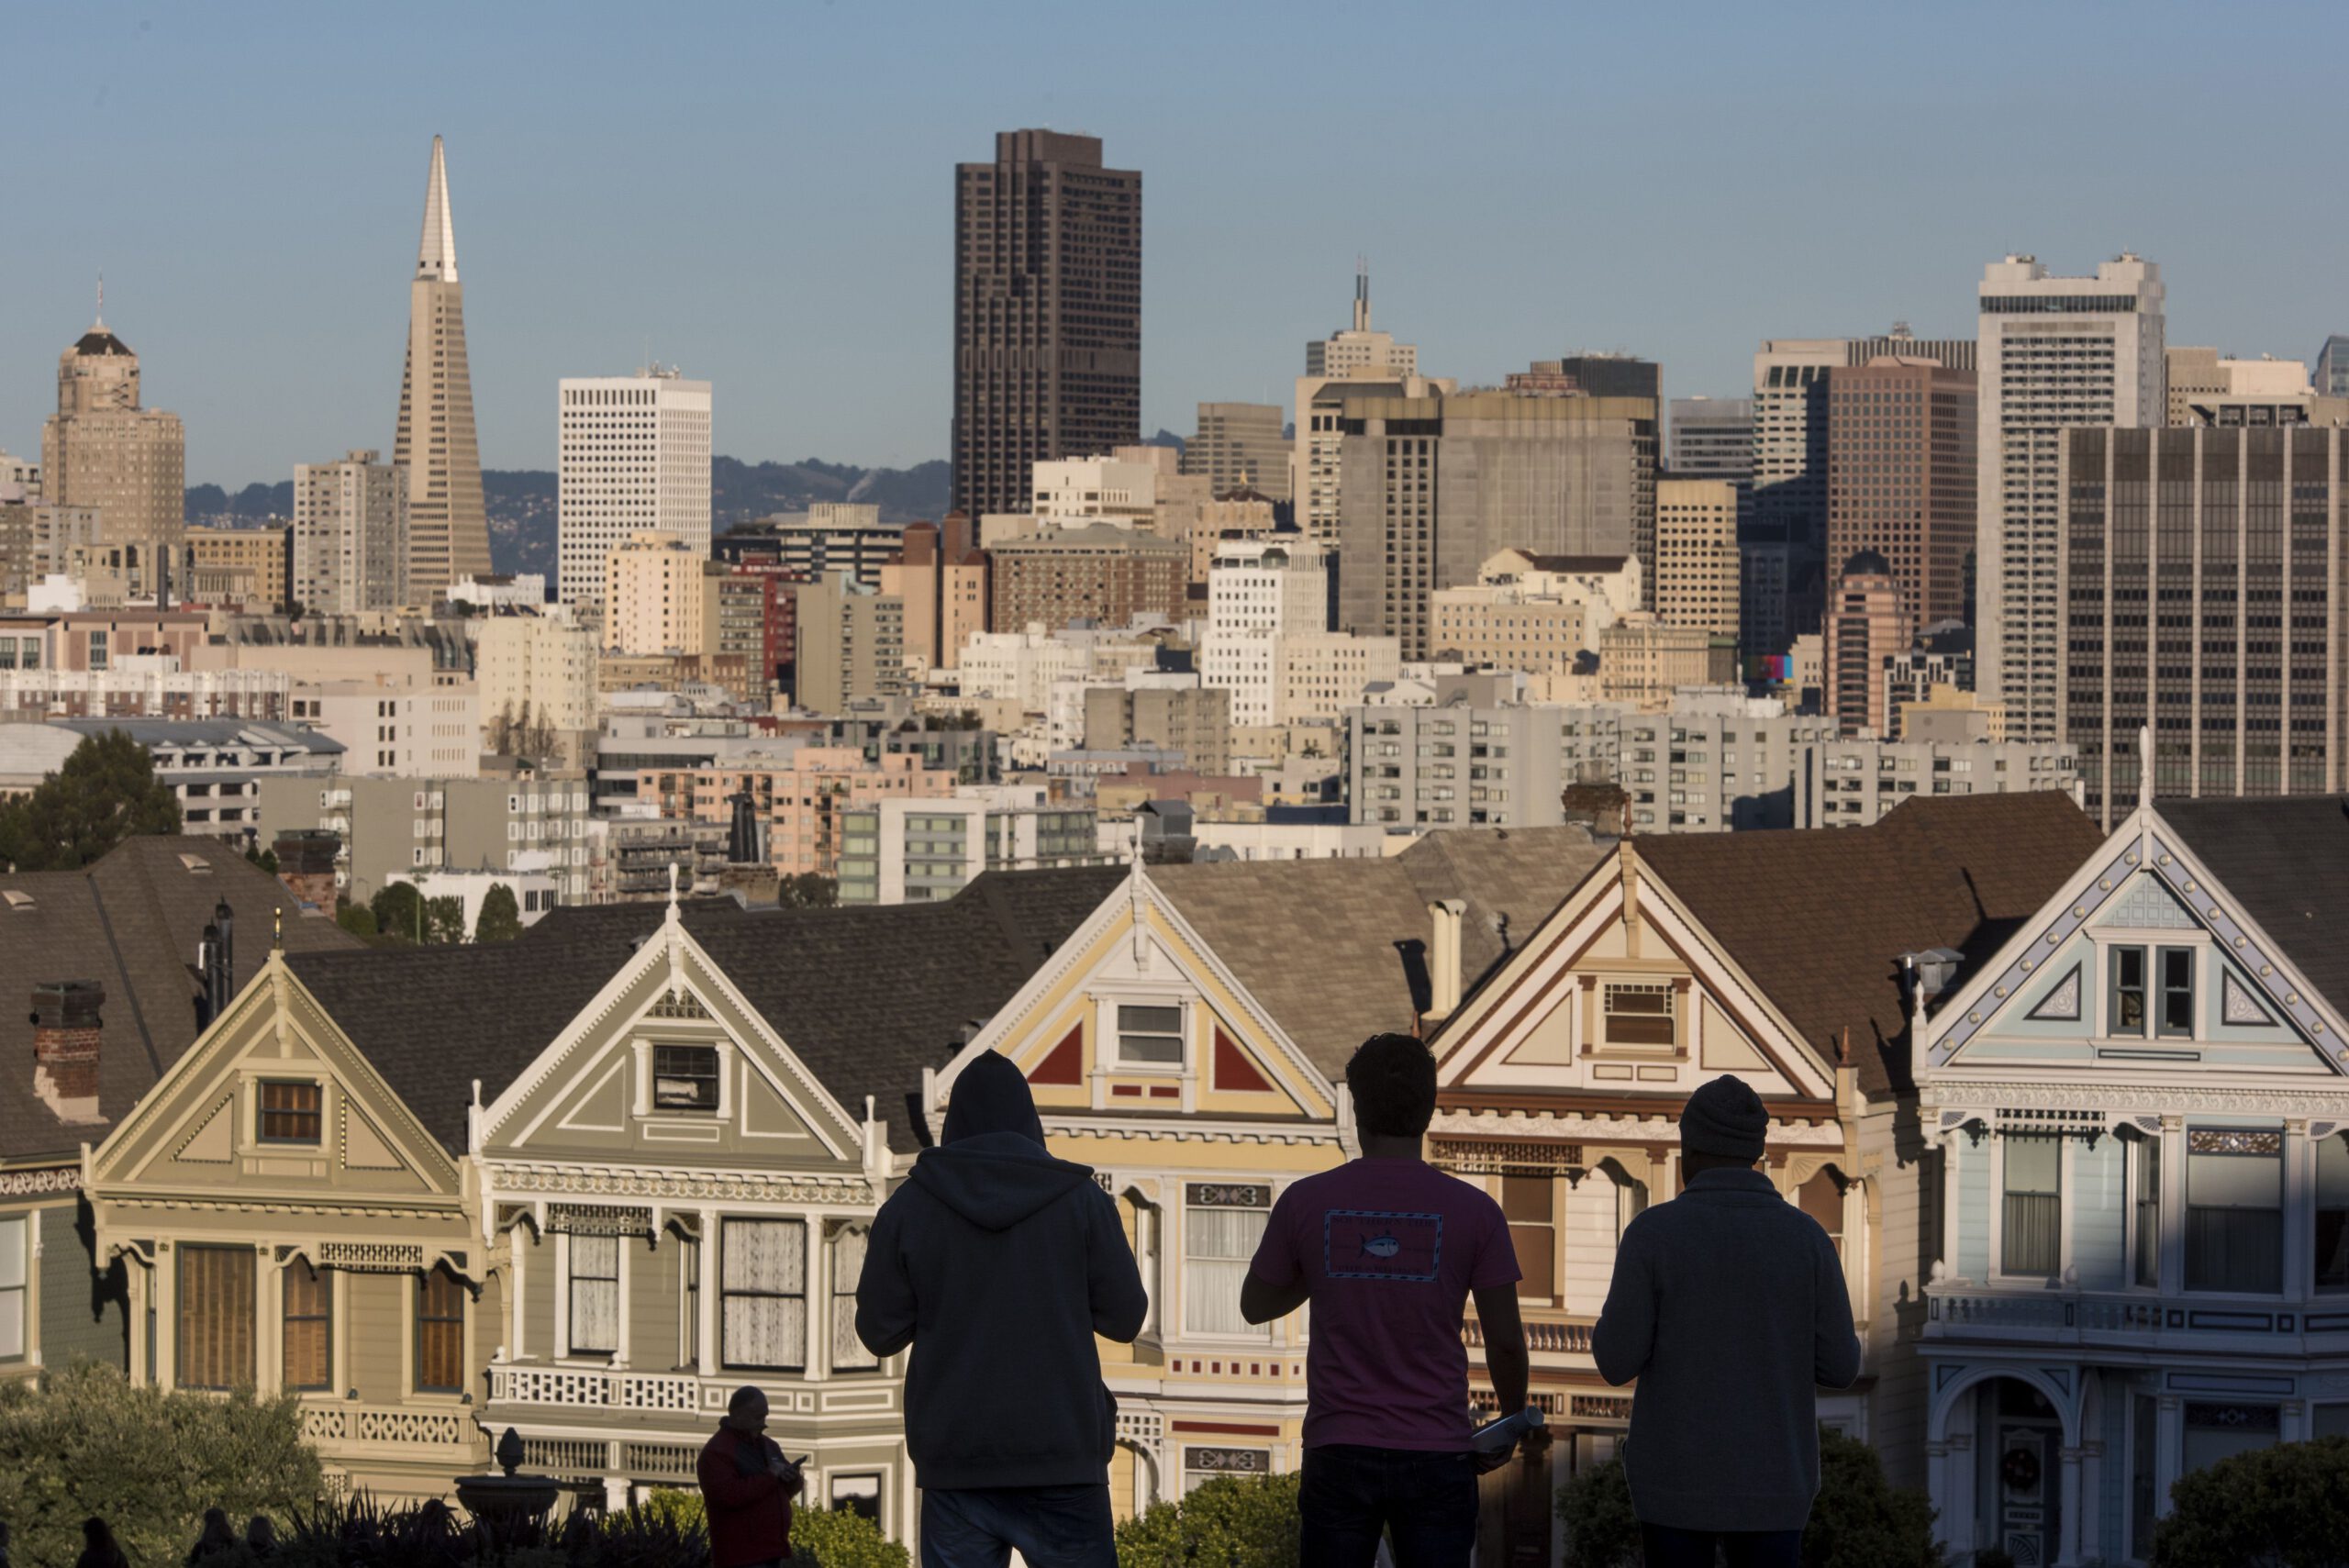 Google to invest $1 billion in San Francisco Bay Area housing